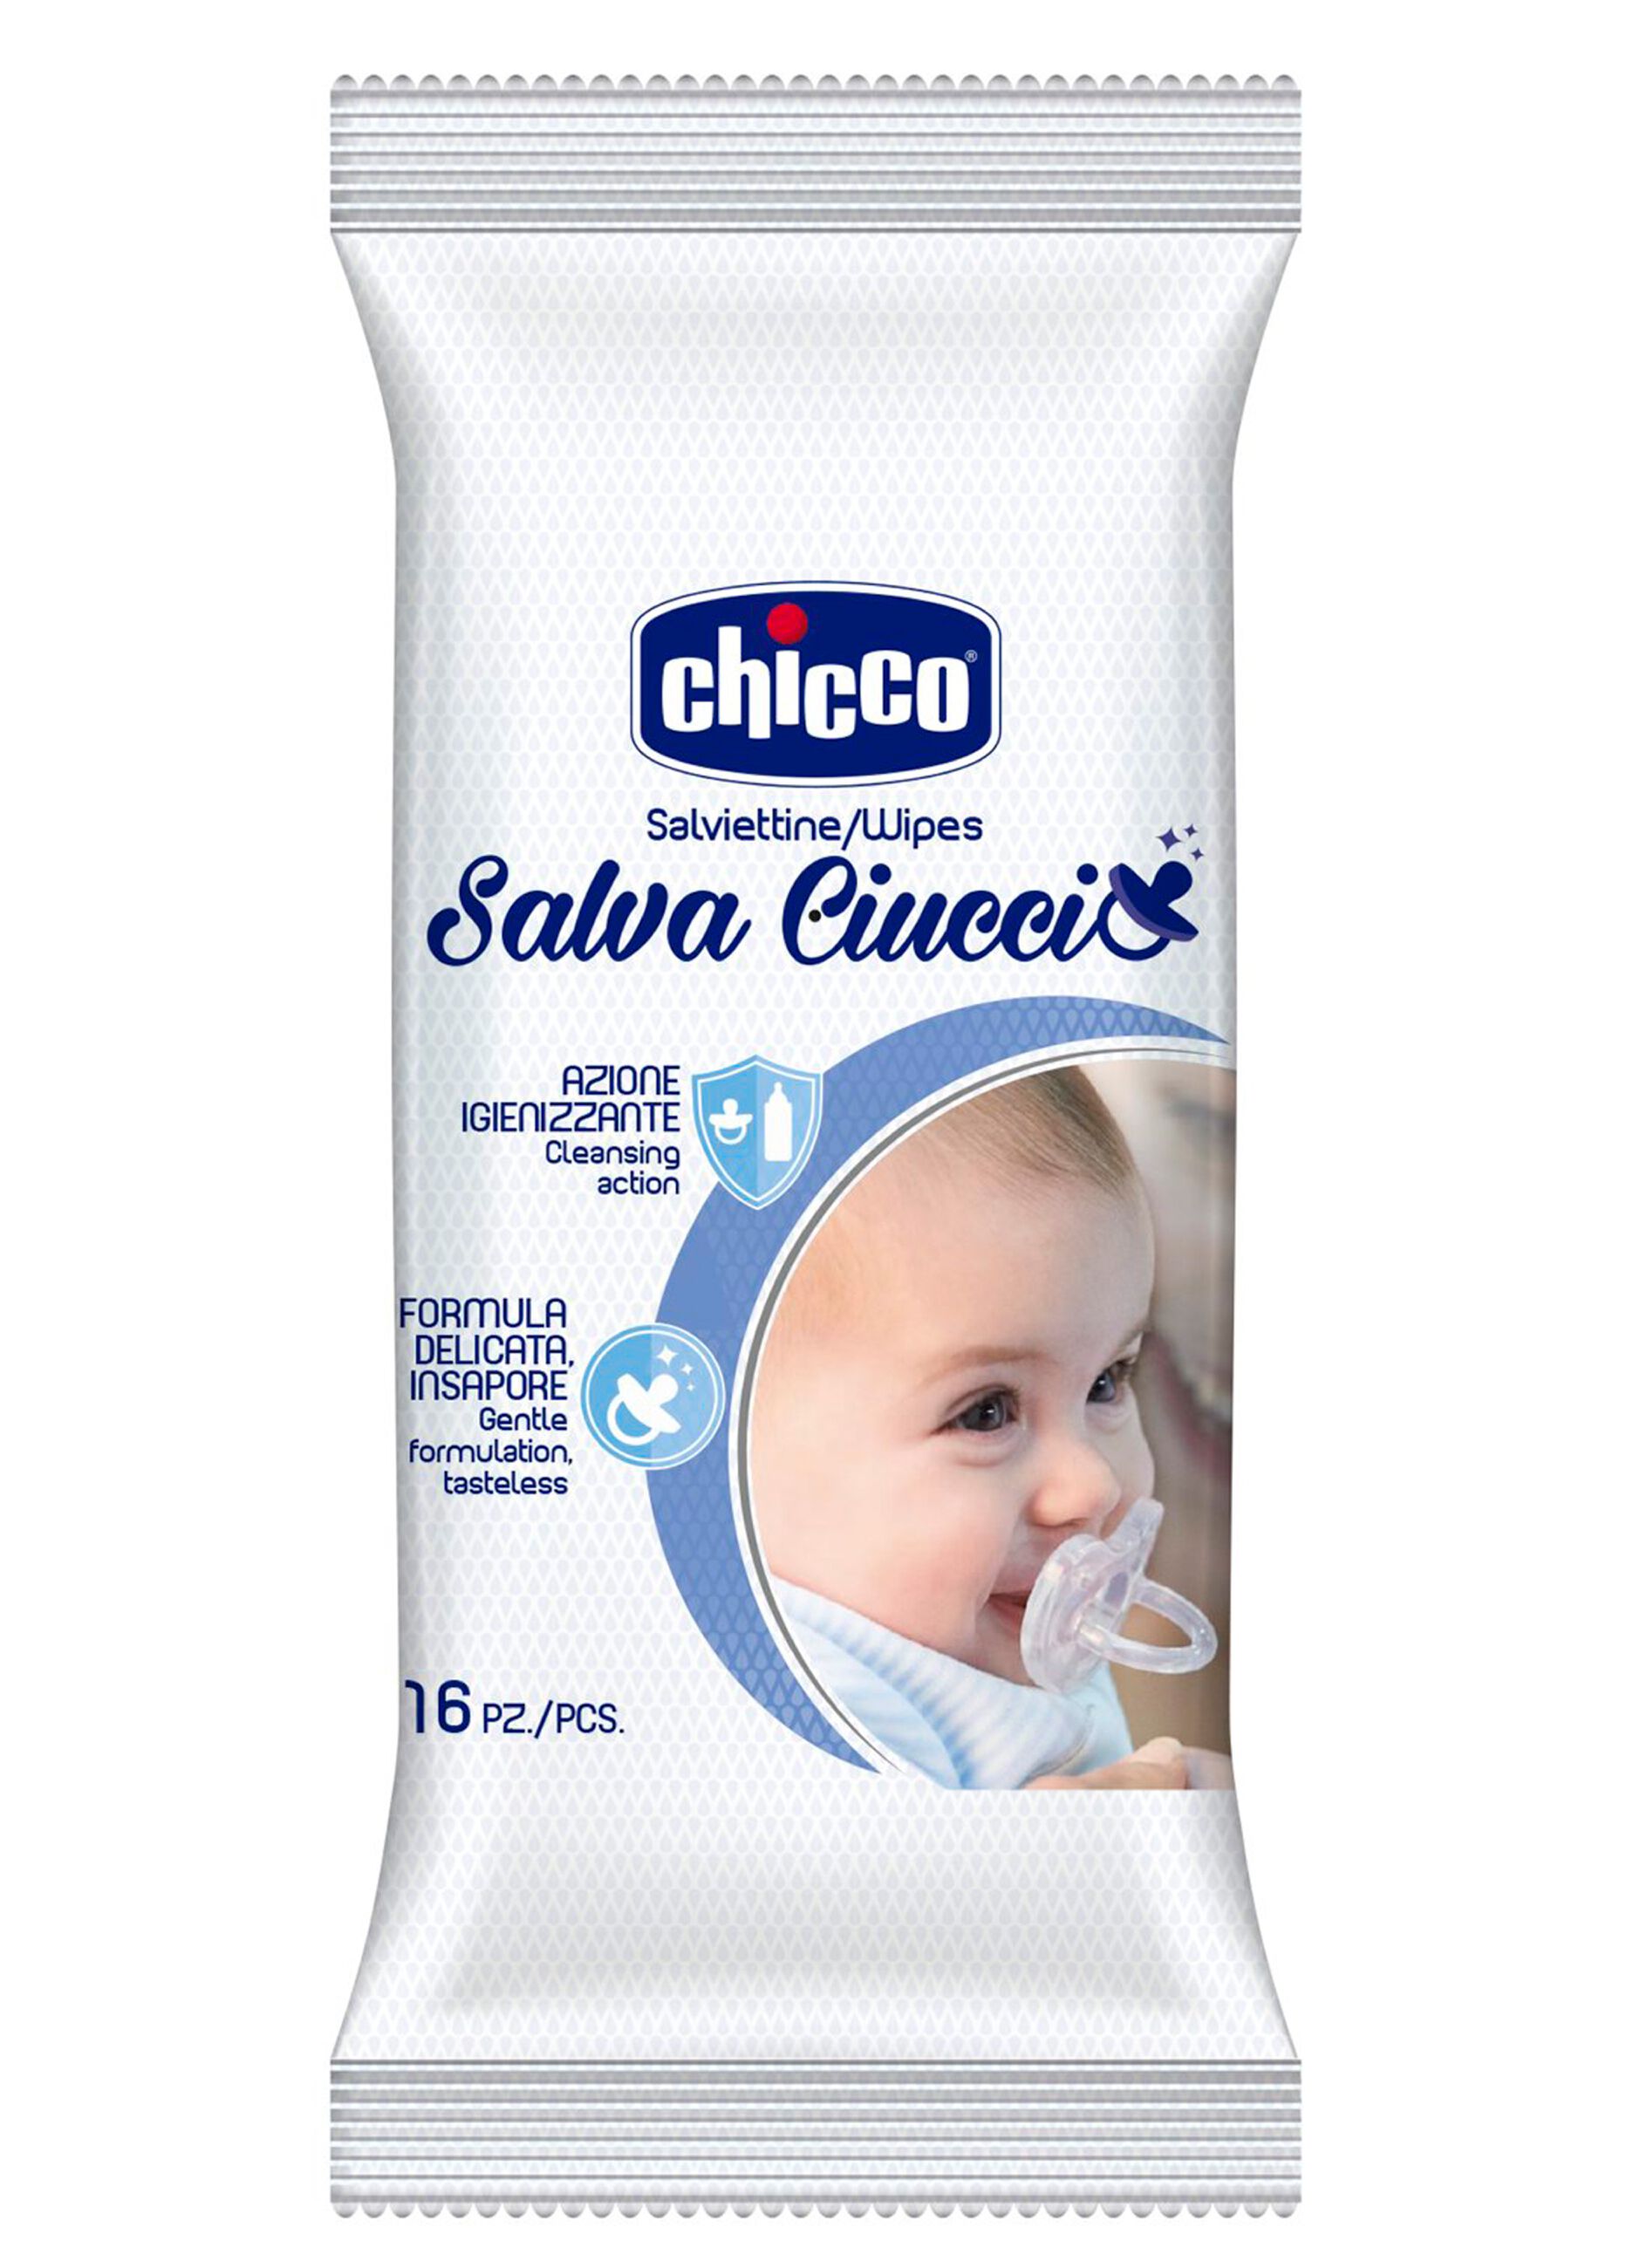 Chicco sanitizing wipes